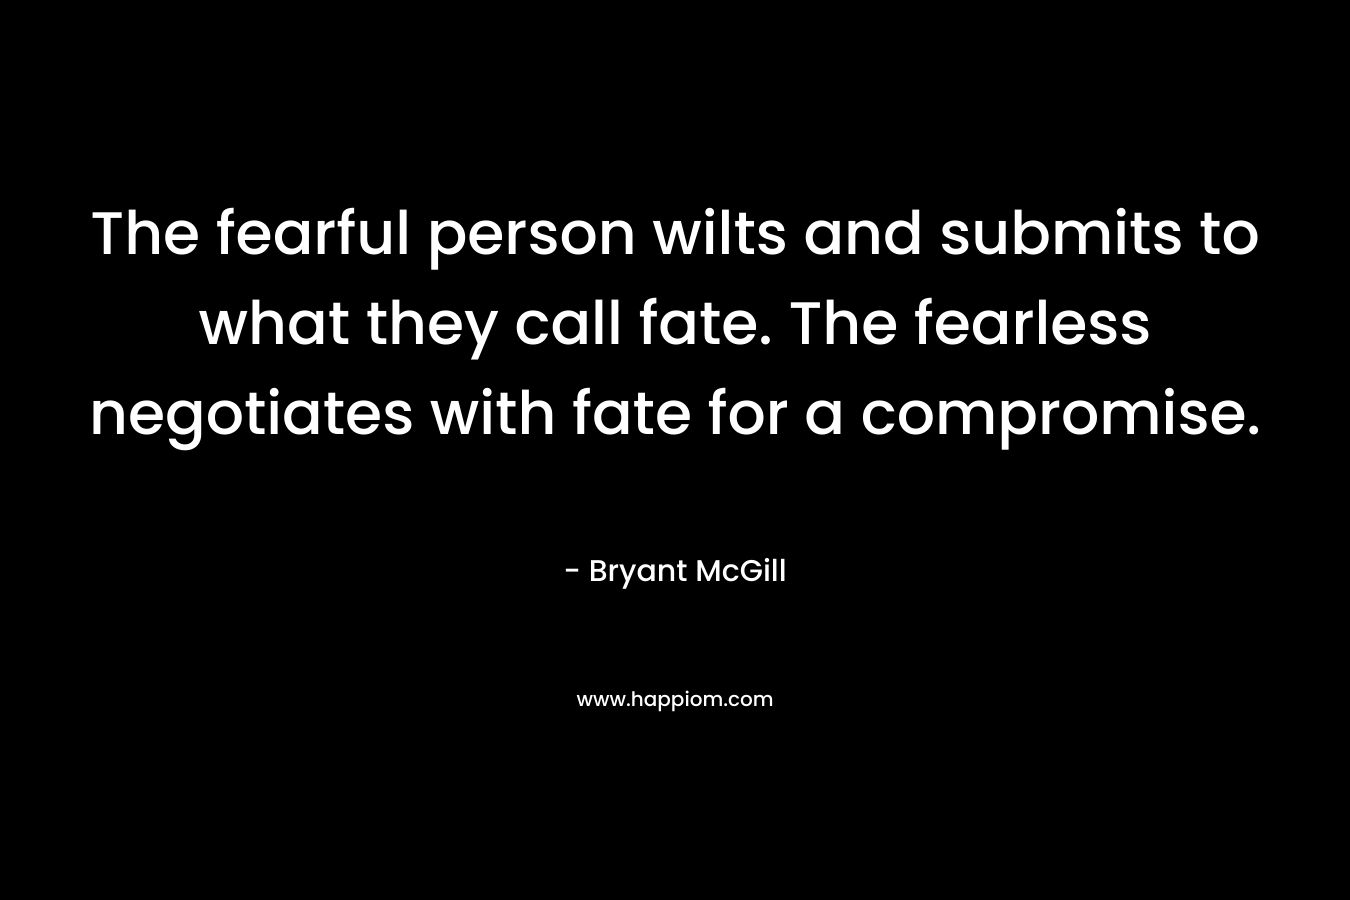 The fearful person wilts and submits to what they call fate. The fearless negotiates with fate for a compromise.